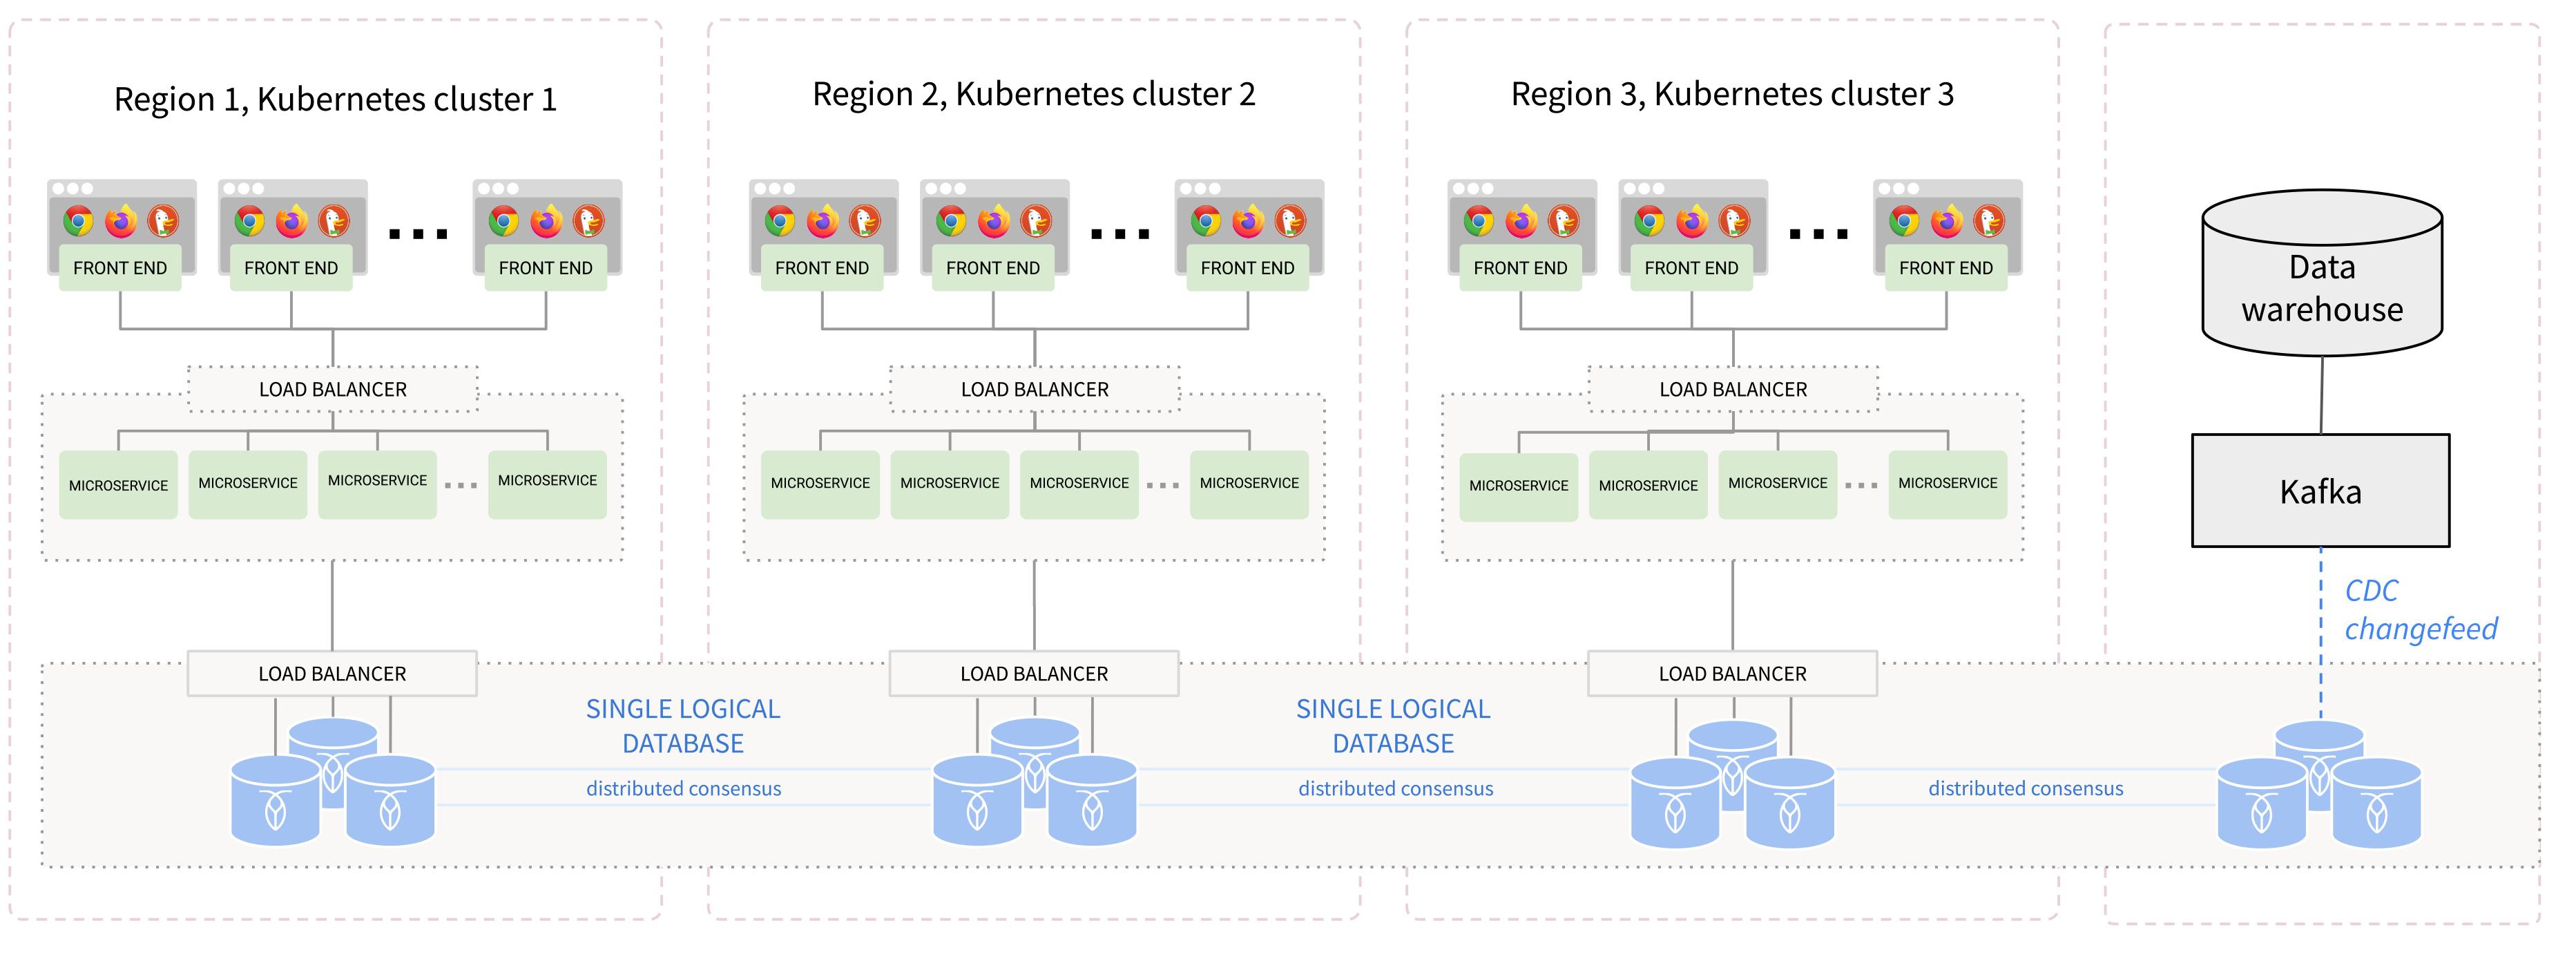 an example of a fault tolerant application architecture making use of Kubernetes and CockroachDB across multiple regions